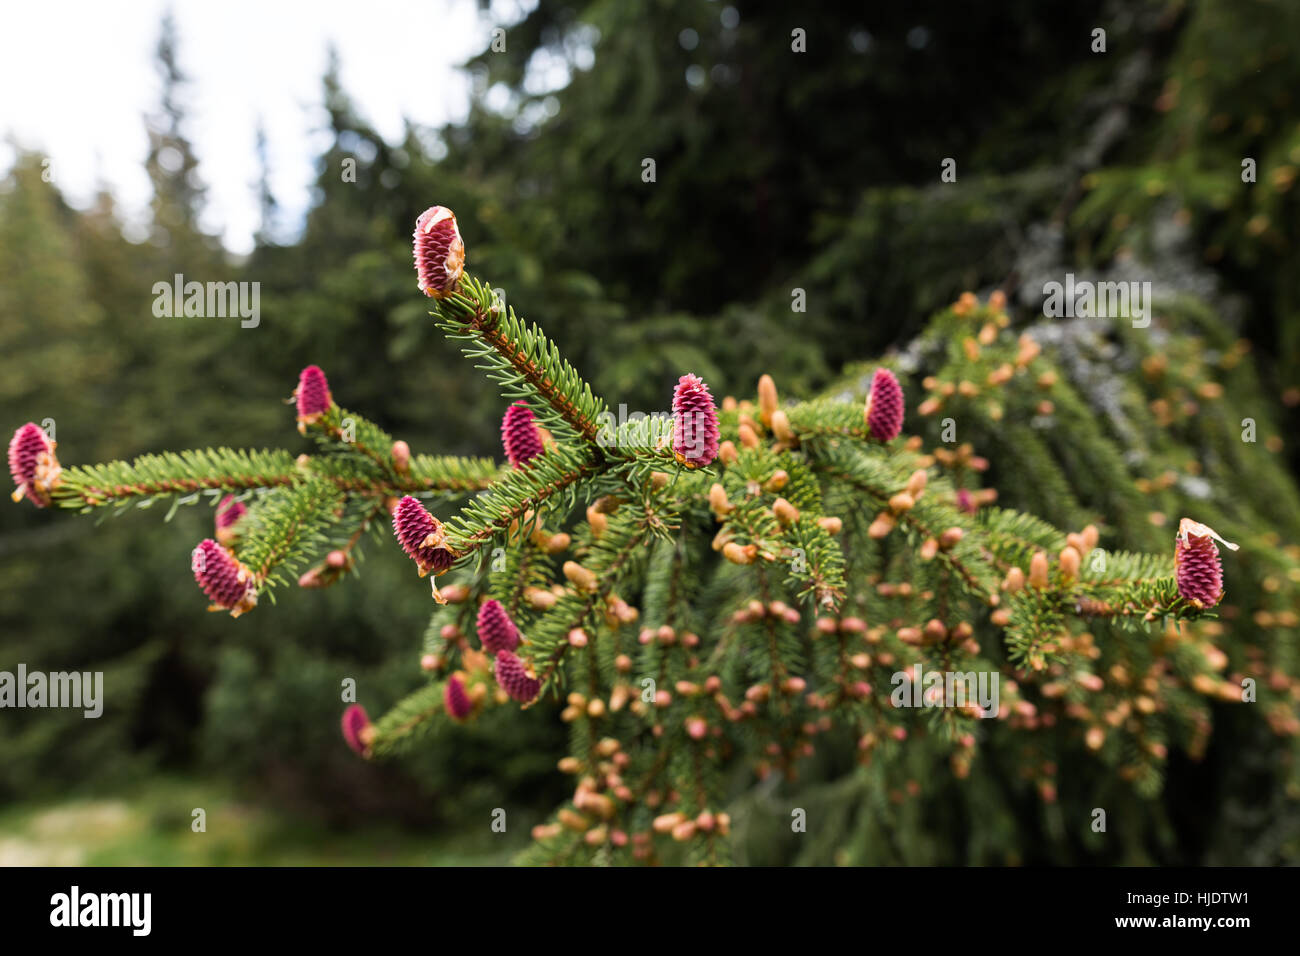 Young branch of spruce tree with conifer cones, High Tatras, Slovakia Stock Photo